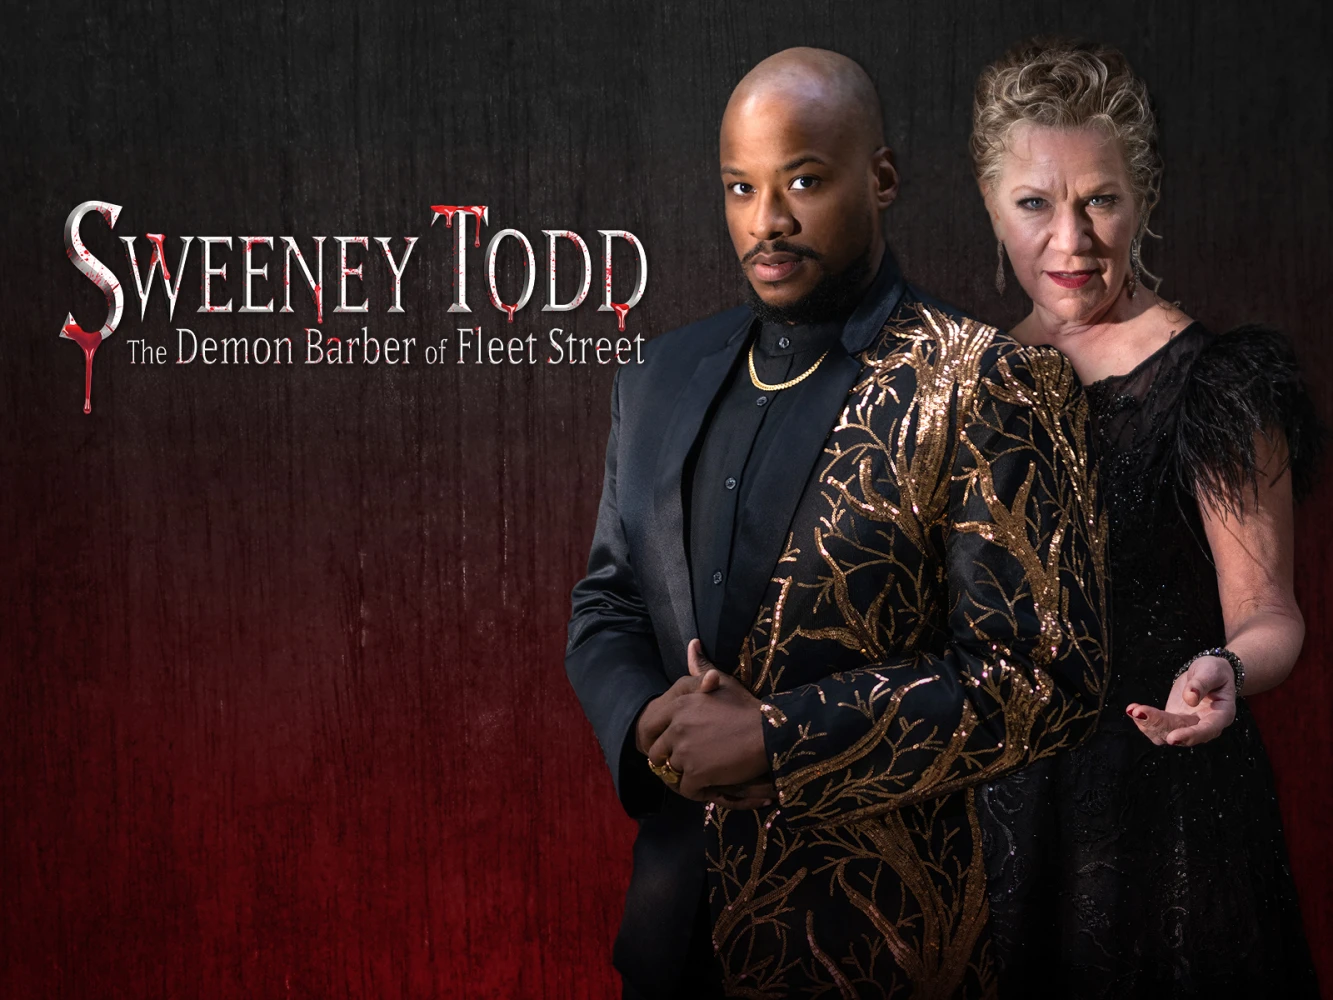 Sweeney Todd: The Demon Barber of Fleet Street: What to expect - 2